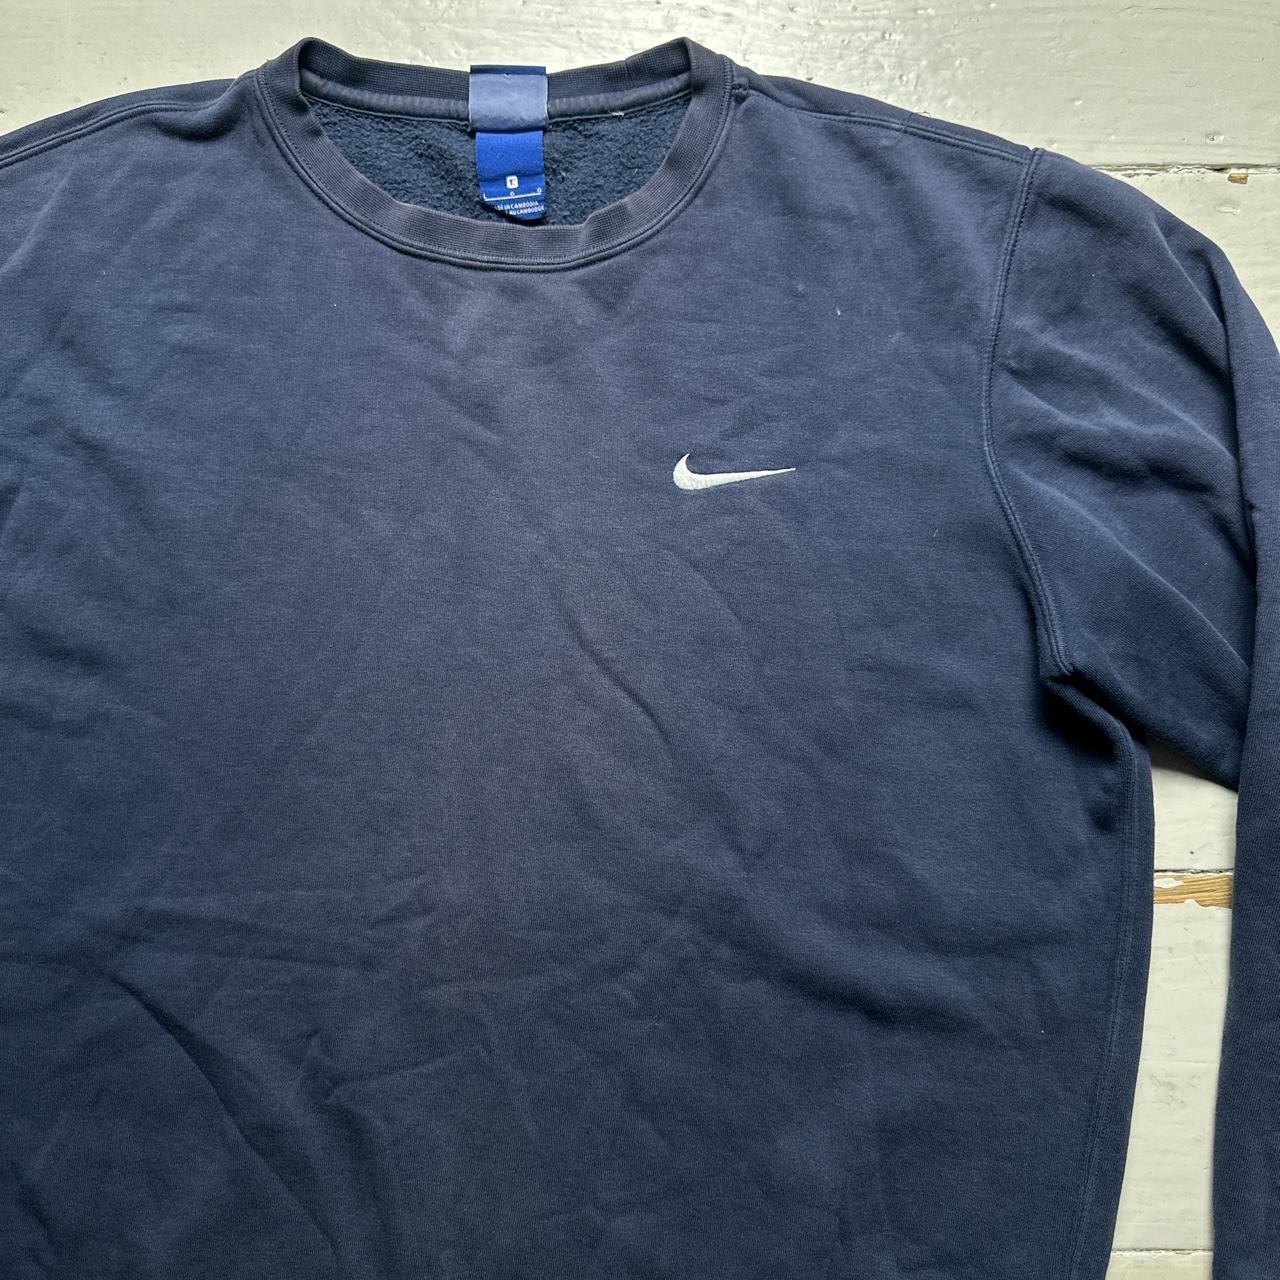 Nike Swoosh Navy and White Jumper